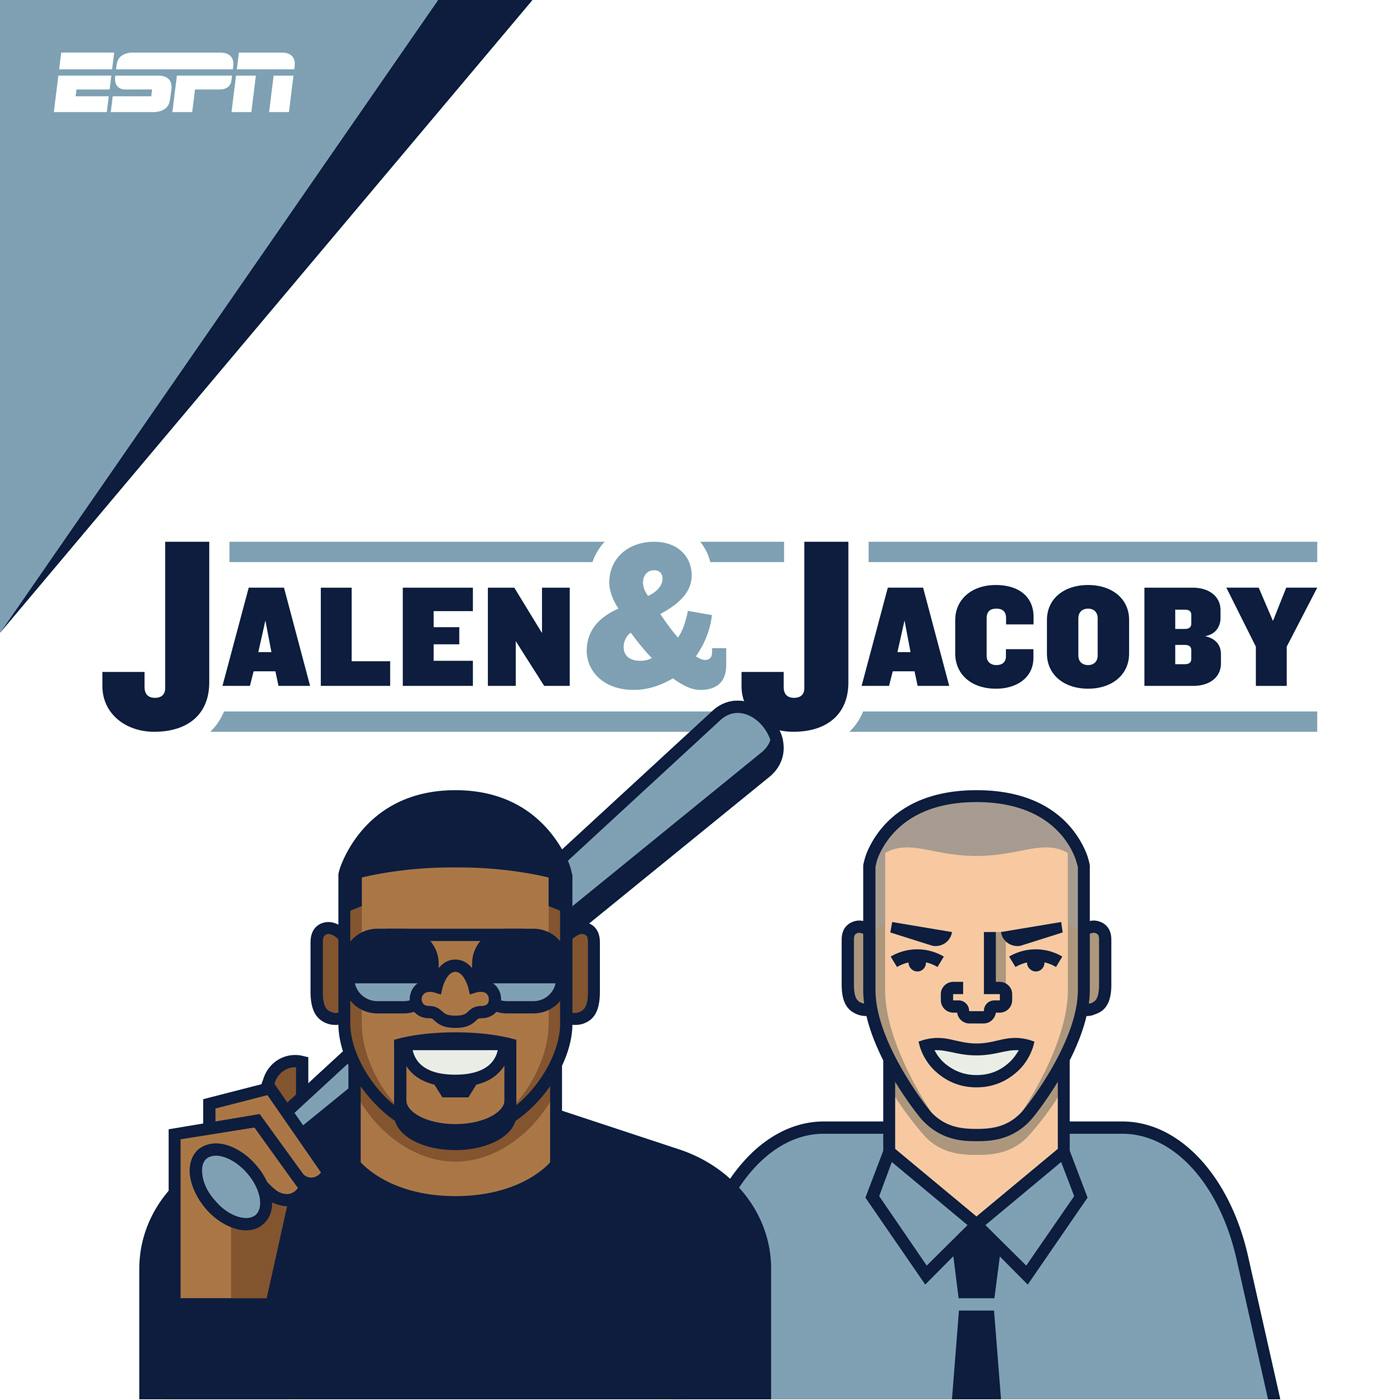 Artwork for the podcast Jalen & Jacoby